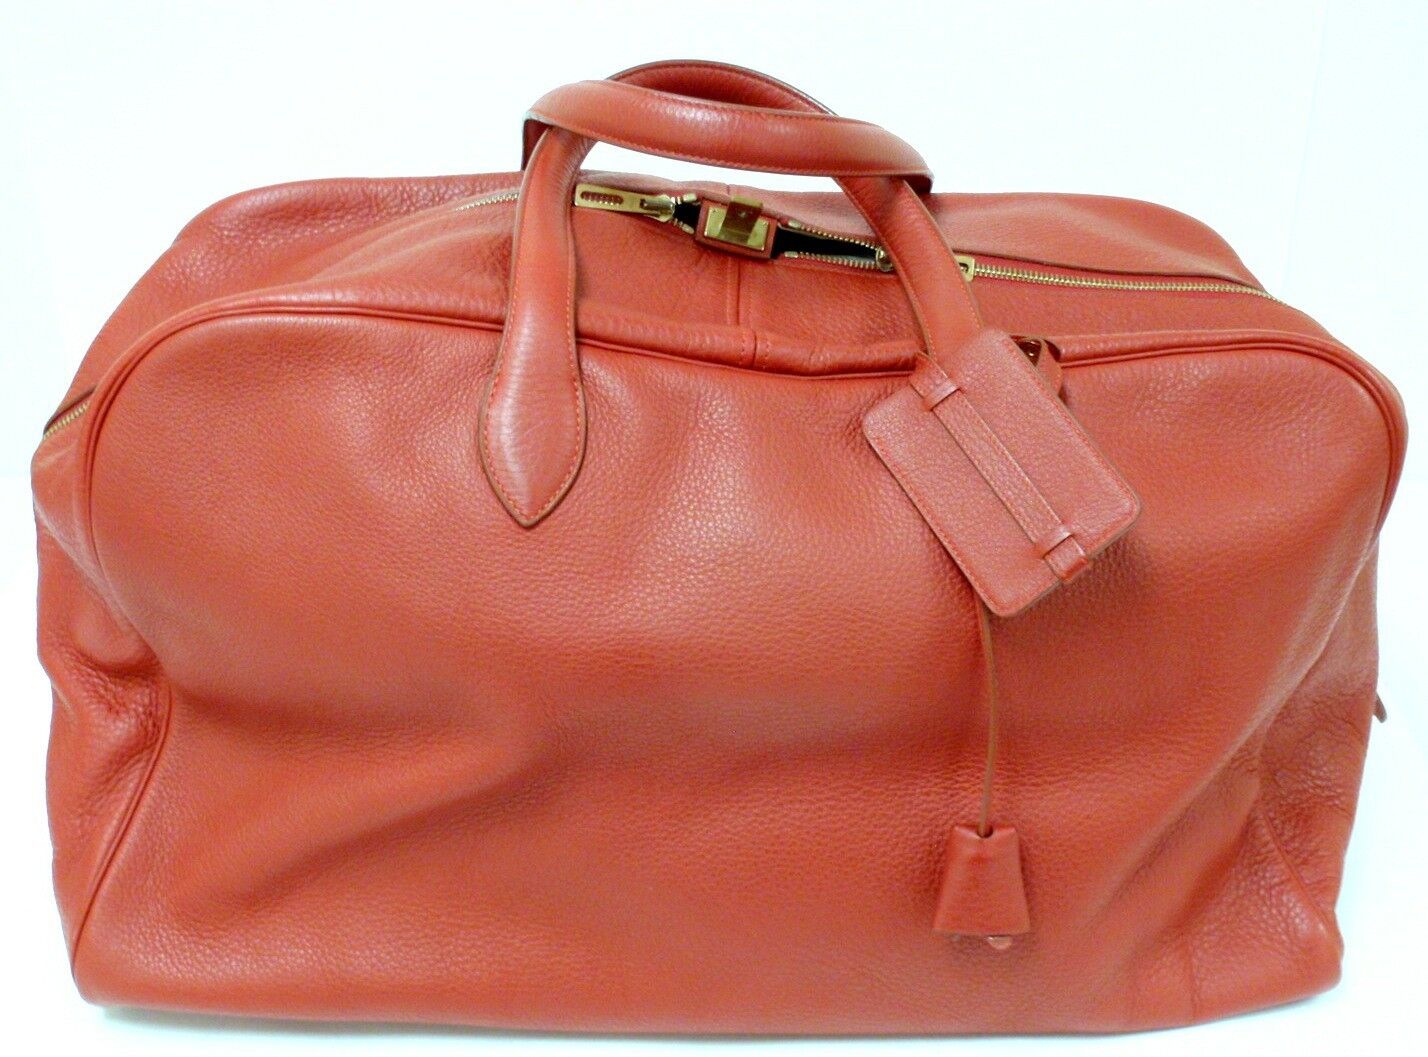 Hermes Clothing, Shoes & Accessories:Women:Women's Bags & Handbags AUTHENTIC! HERMES 50CM VICTORIA RED CLEMENCE TRAVEL TOTE GHW HANDBAG, YEAR 1998